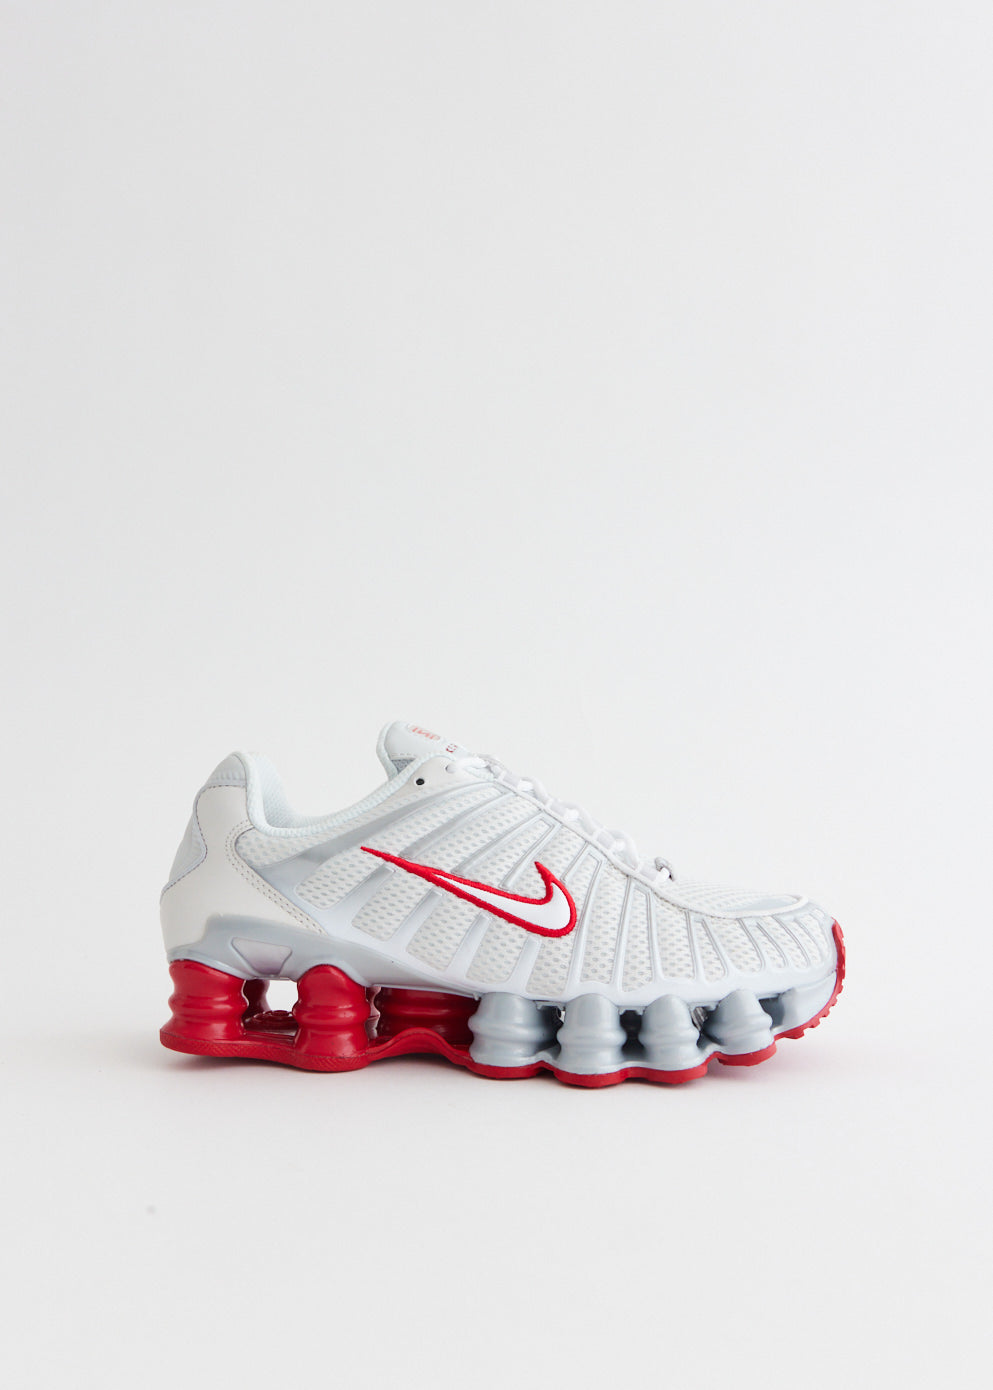 Women's Shox TL 'Platinum Tint Gym Red' Sneakers